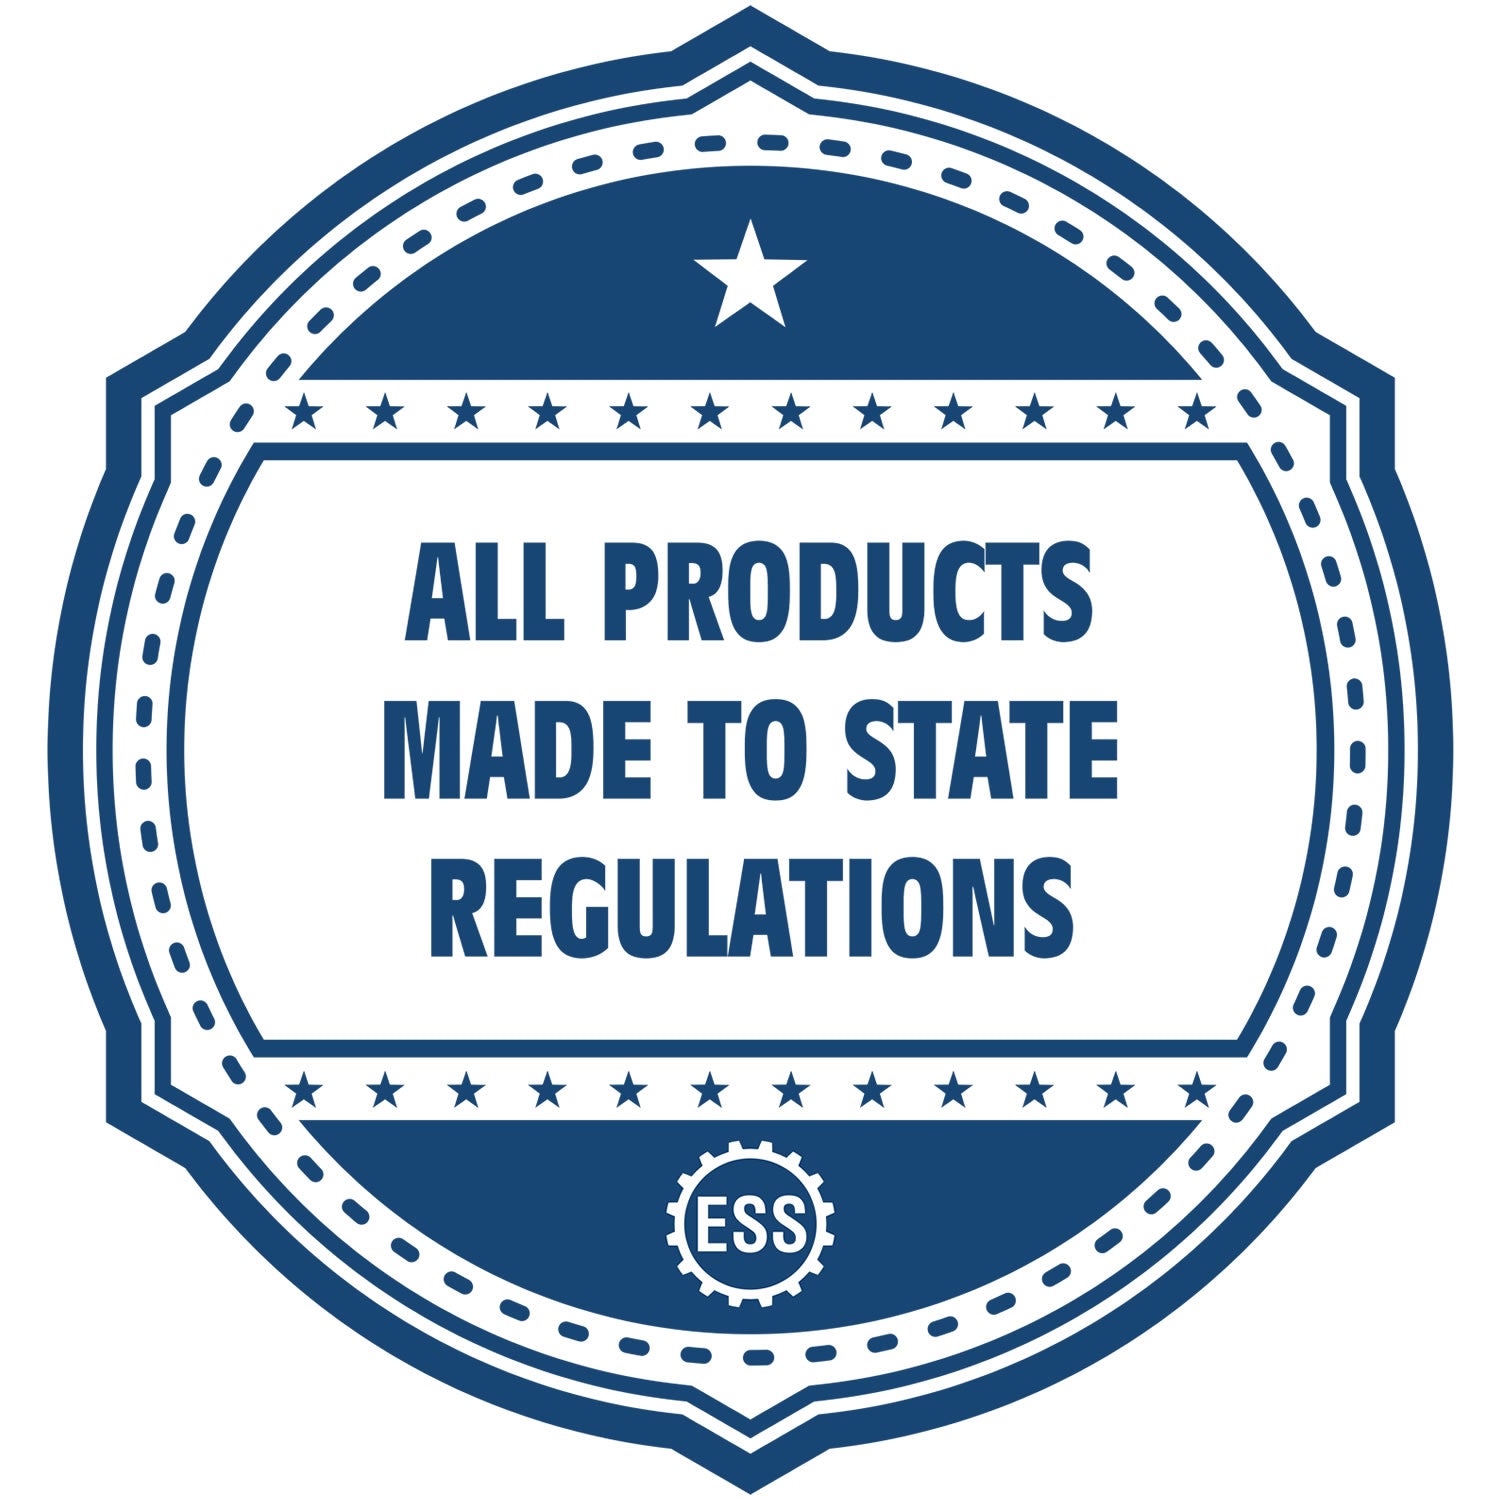 An icon or badge element for the Self-Inking Idaho Landscape Architect Stamp showing that this product is made in compliance with state regulations.